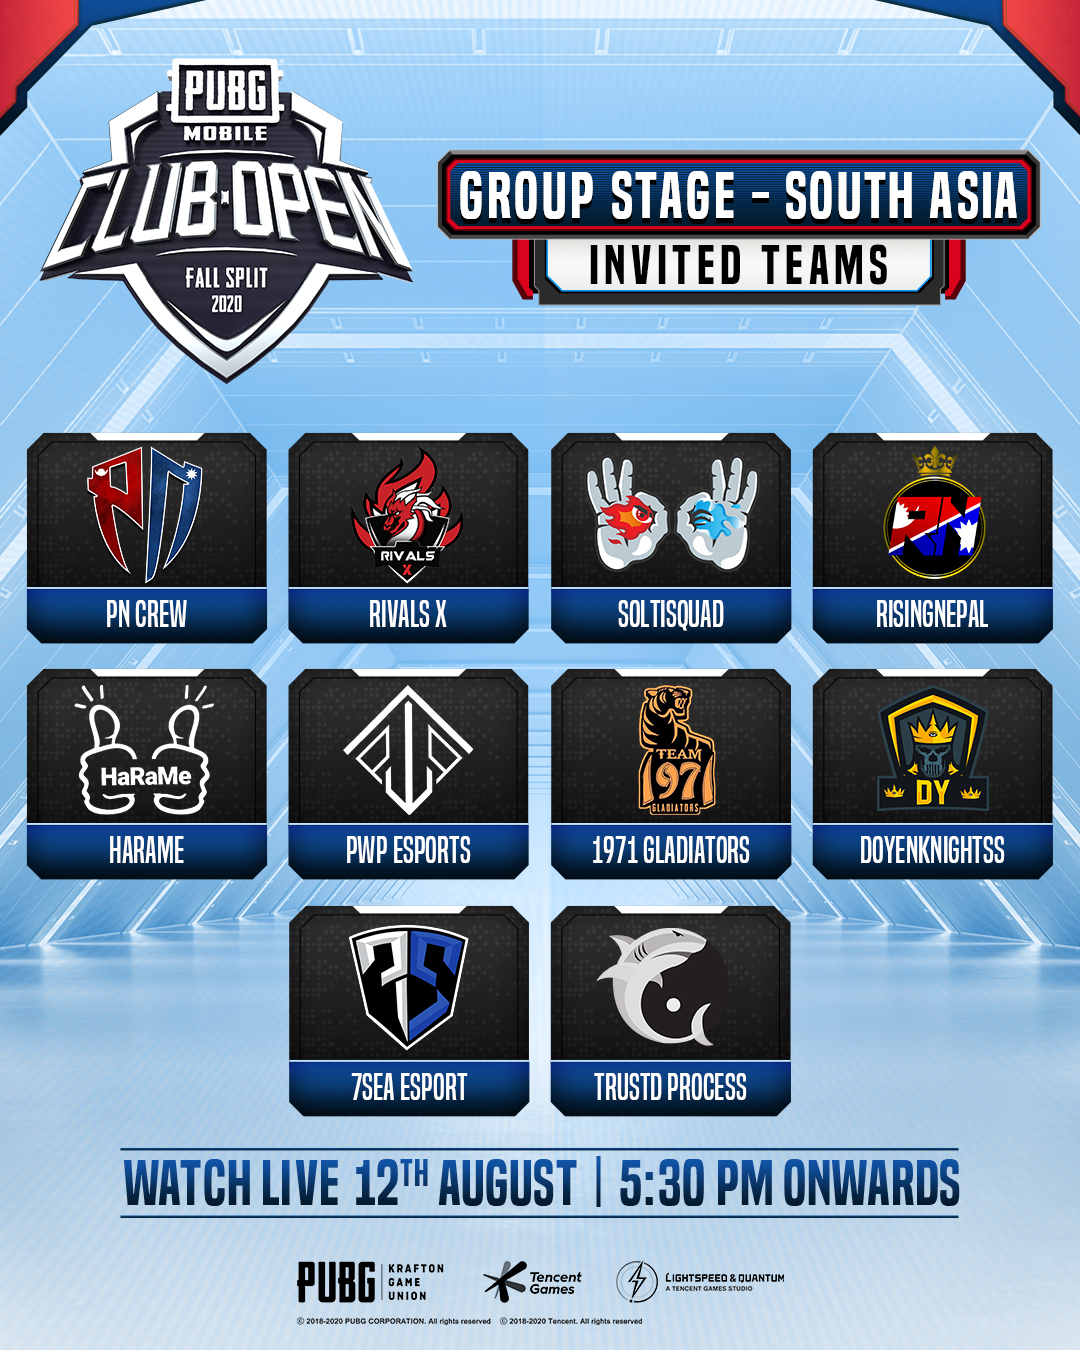 pubg mobile esports na twitteru the invited teams of the pubg mobile club open fall split 2020 pmco india south asia pakistan watch the action live https t co igiahr7jbo https t co ekdjfocamd https t co rgegn6fg9q https t co